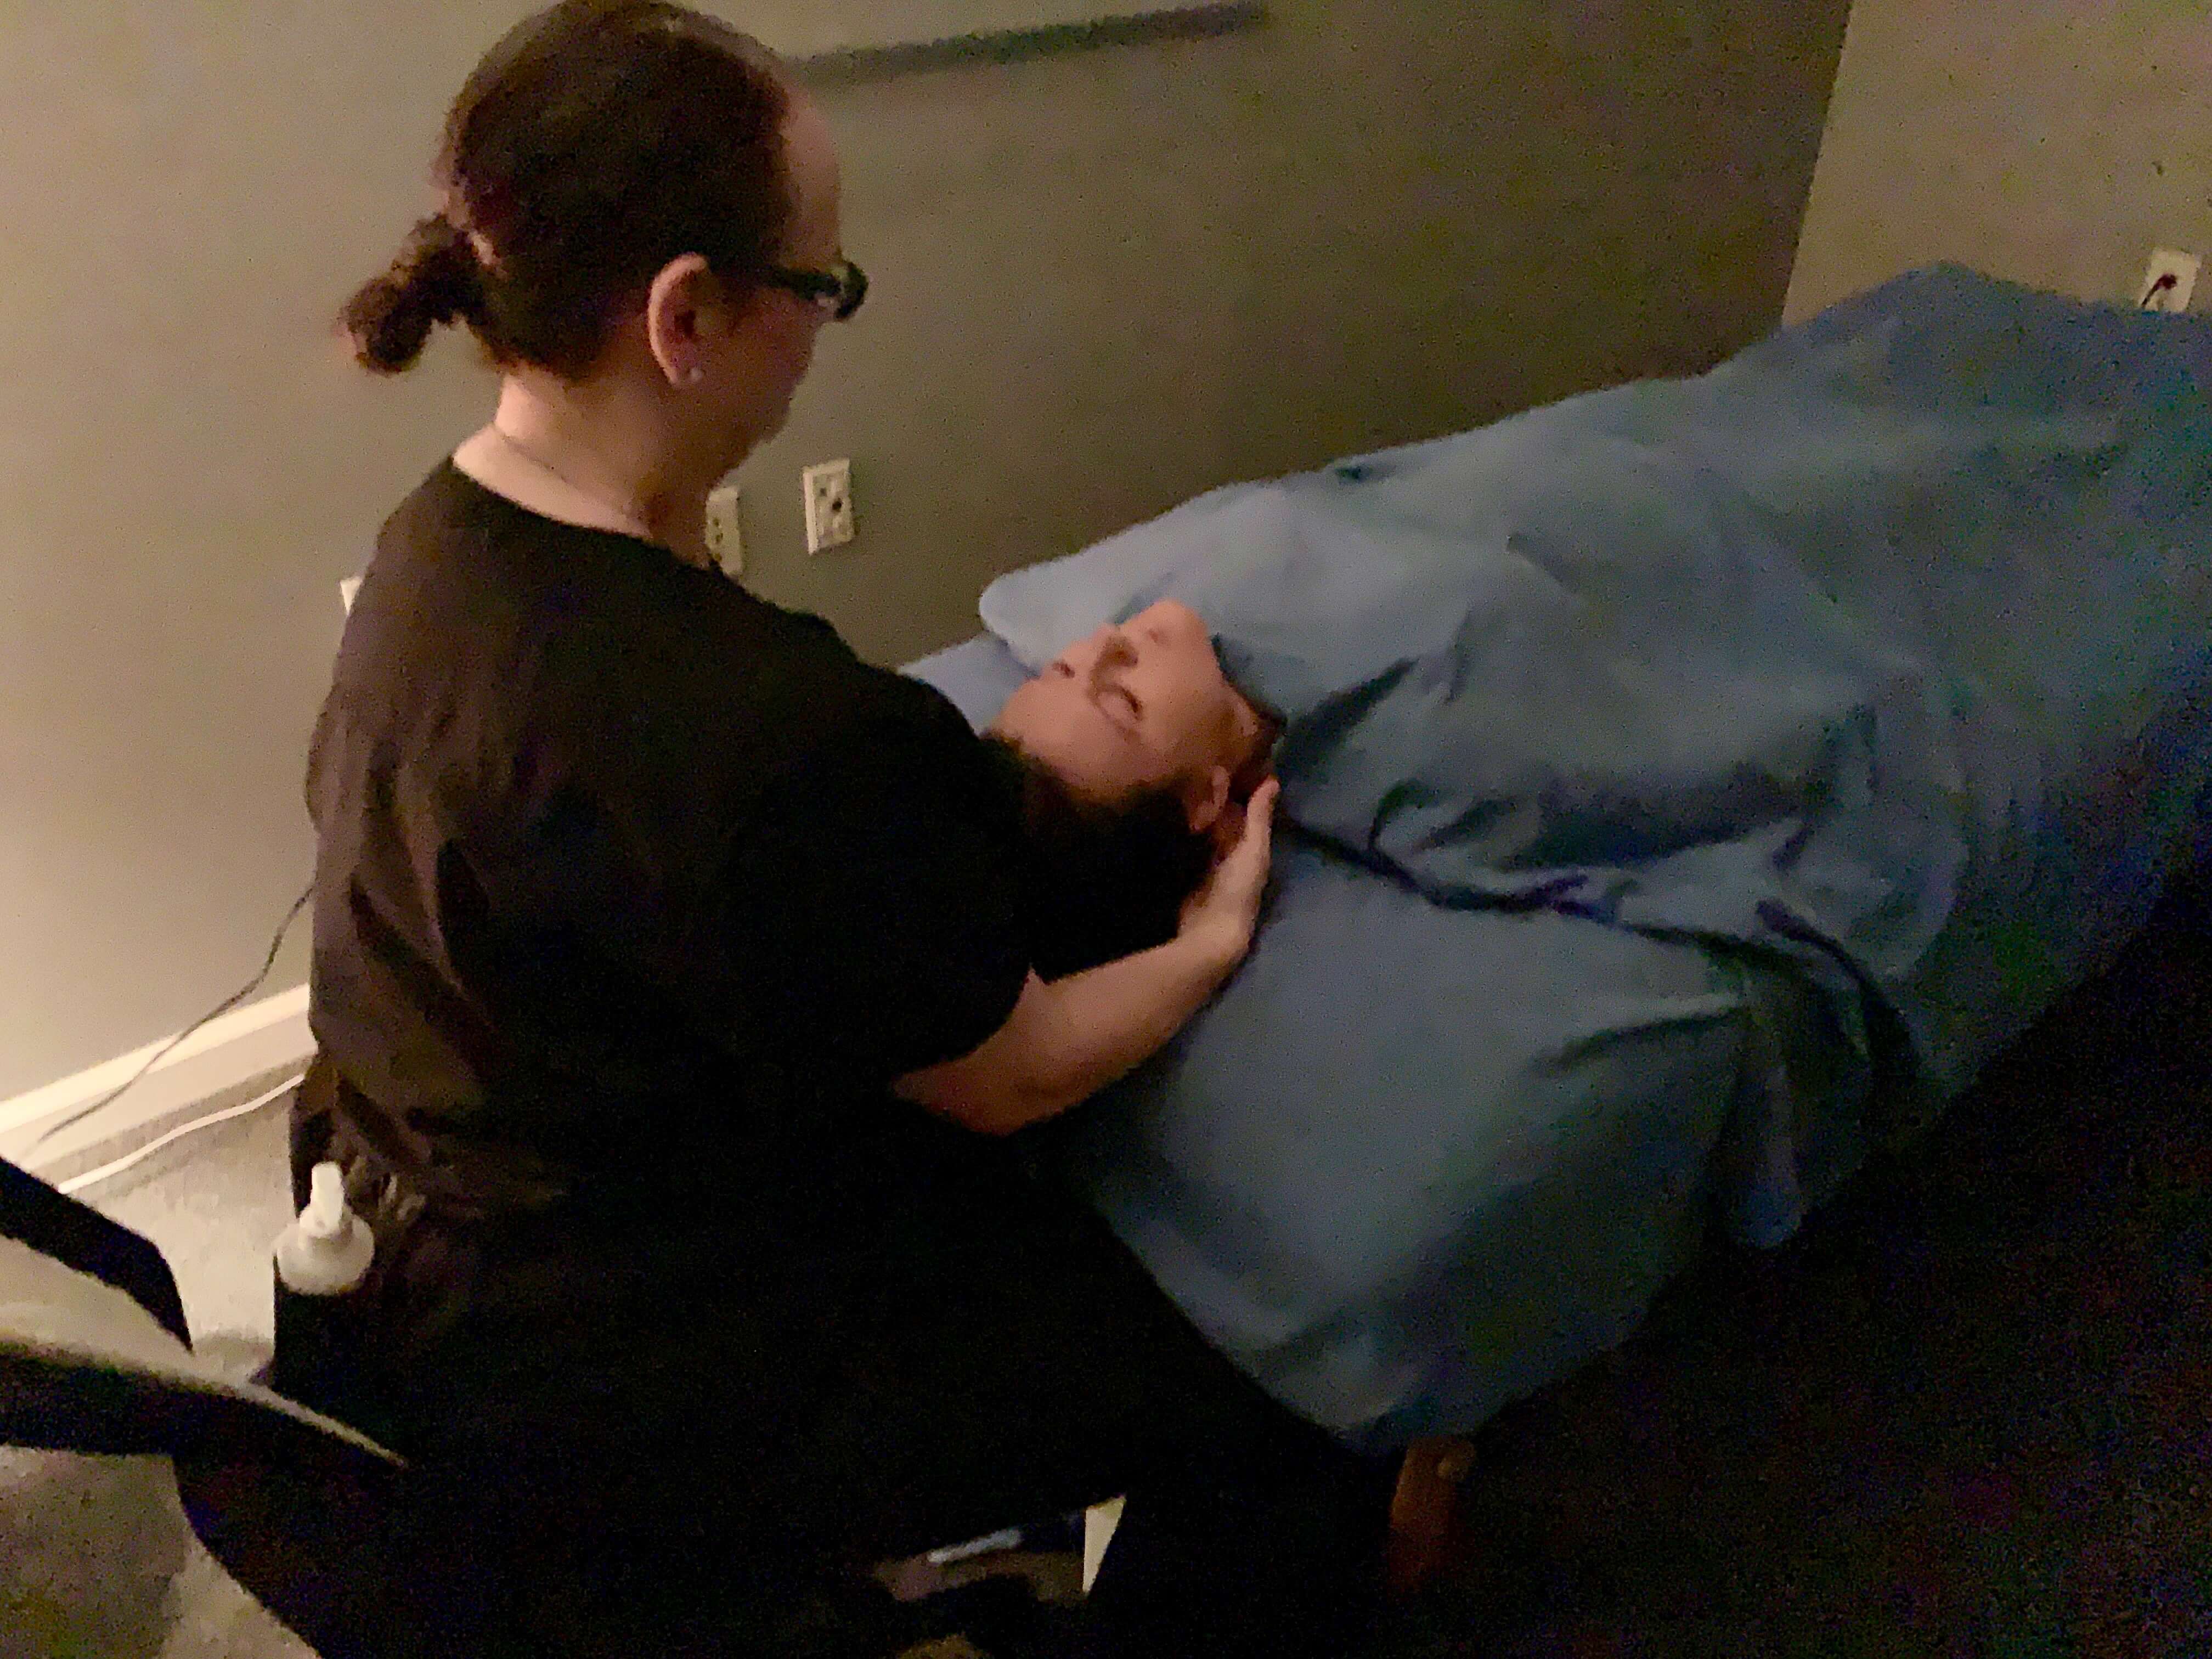 amy massages a client at foundation chiropractic in hampton georgia